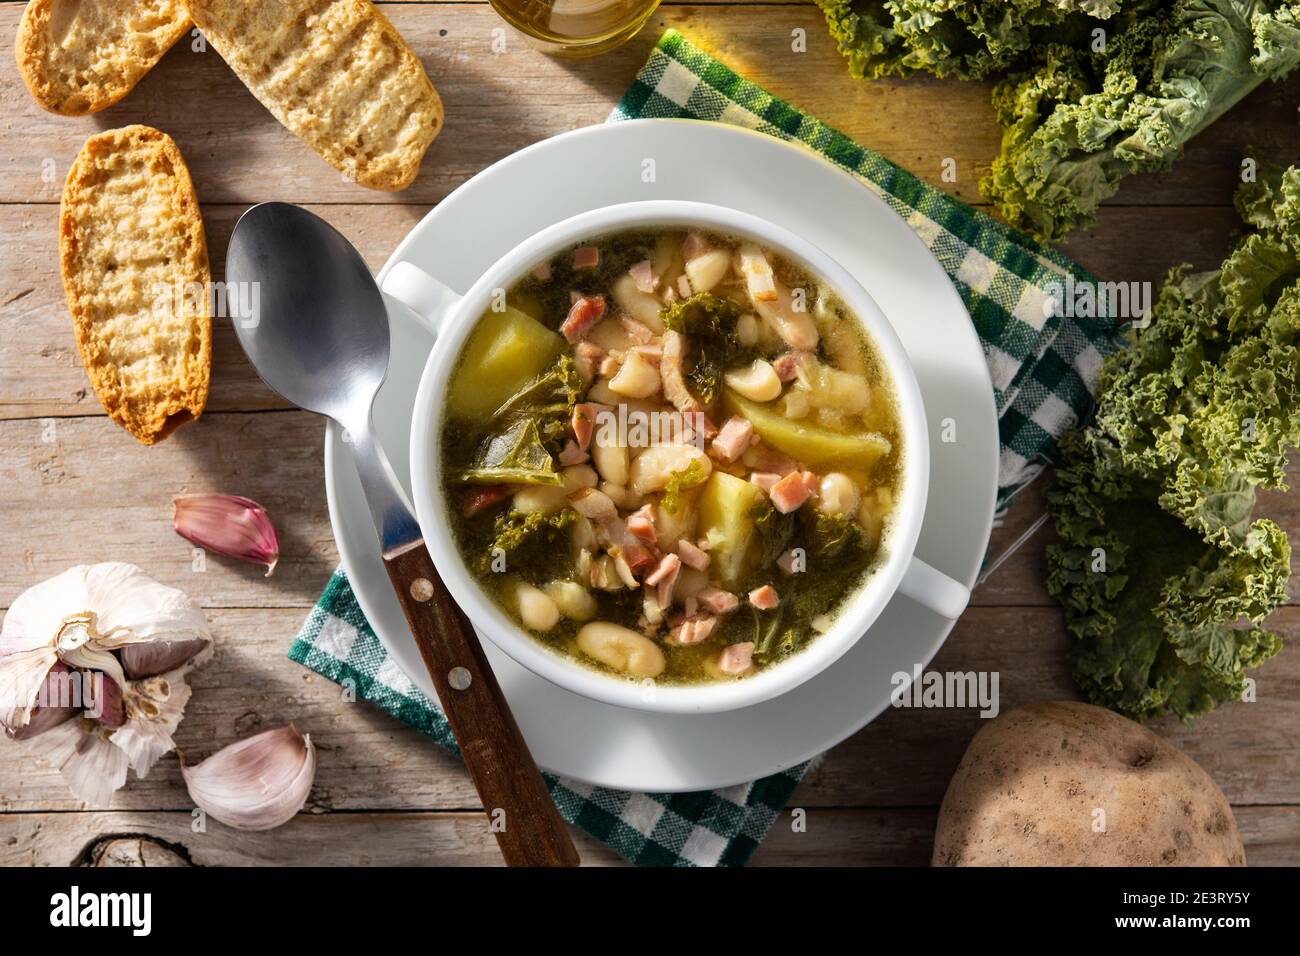 Creamy Tuscan soup on wooden table Stock Photo